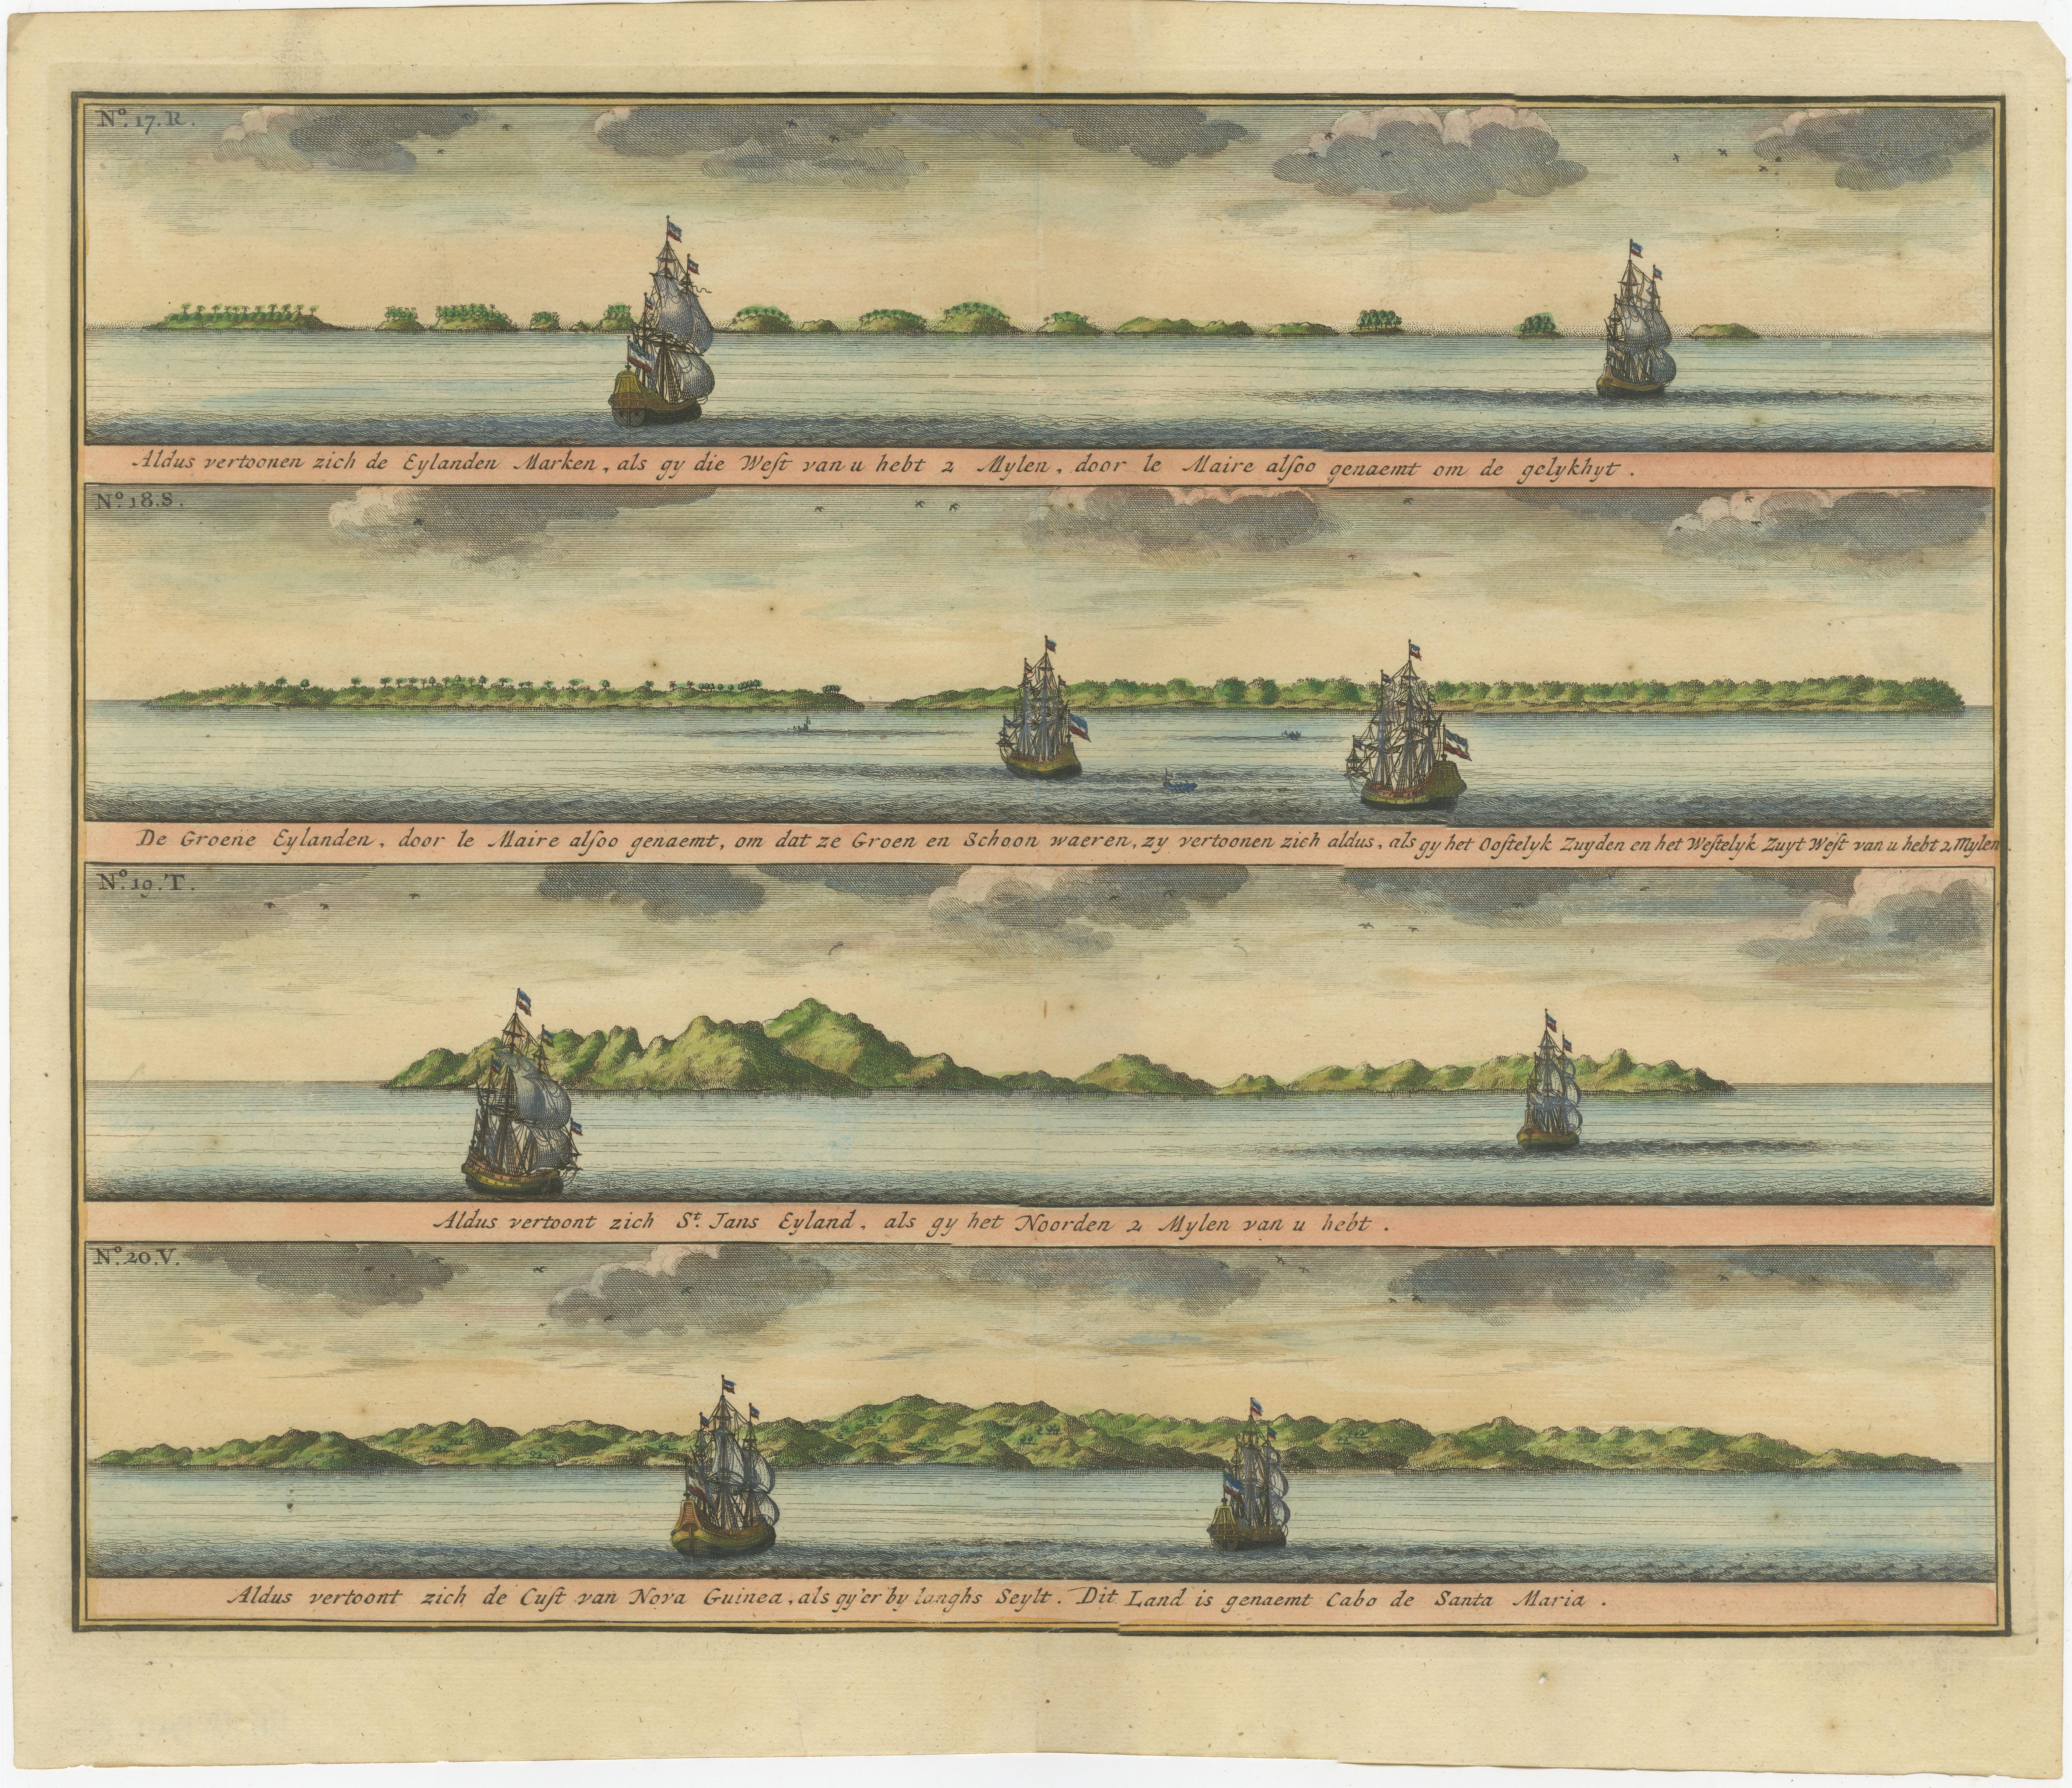 Antique print titled 'De Kust van Nova Guinea tot aan deze bogt (..)'. Four engravings on one sheet showing panoramic views of the islands of Marken, the Groene islands, Sint Jans island and New Ireland, on the same latitude as Cabo de Santa Maria.